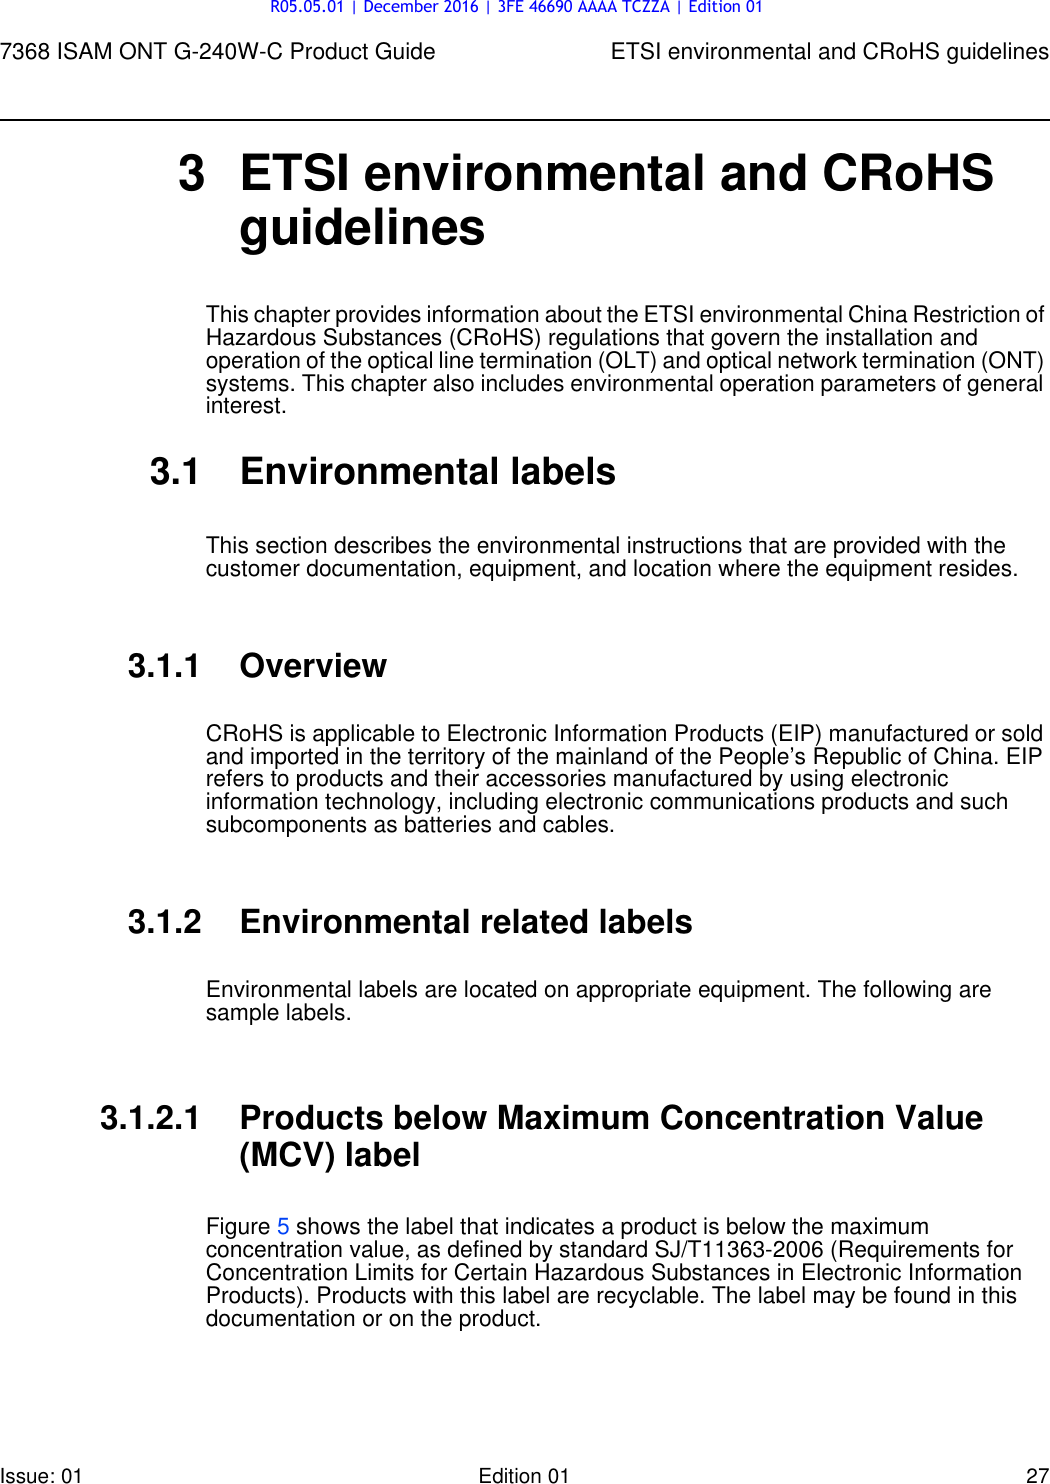 Page 27 of Nokia Bell G240W-C GPON ONU User Manual 7368 ISAM ONT G 240W B Product Guide